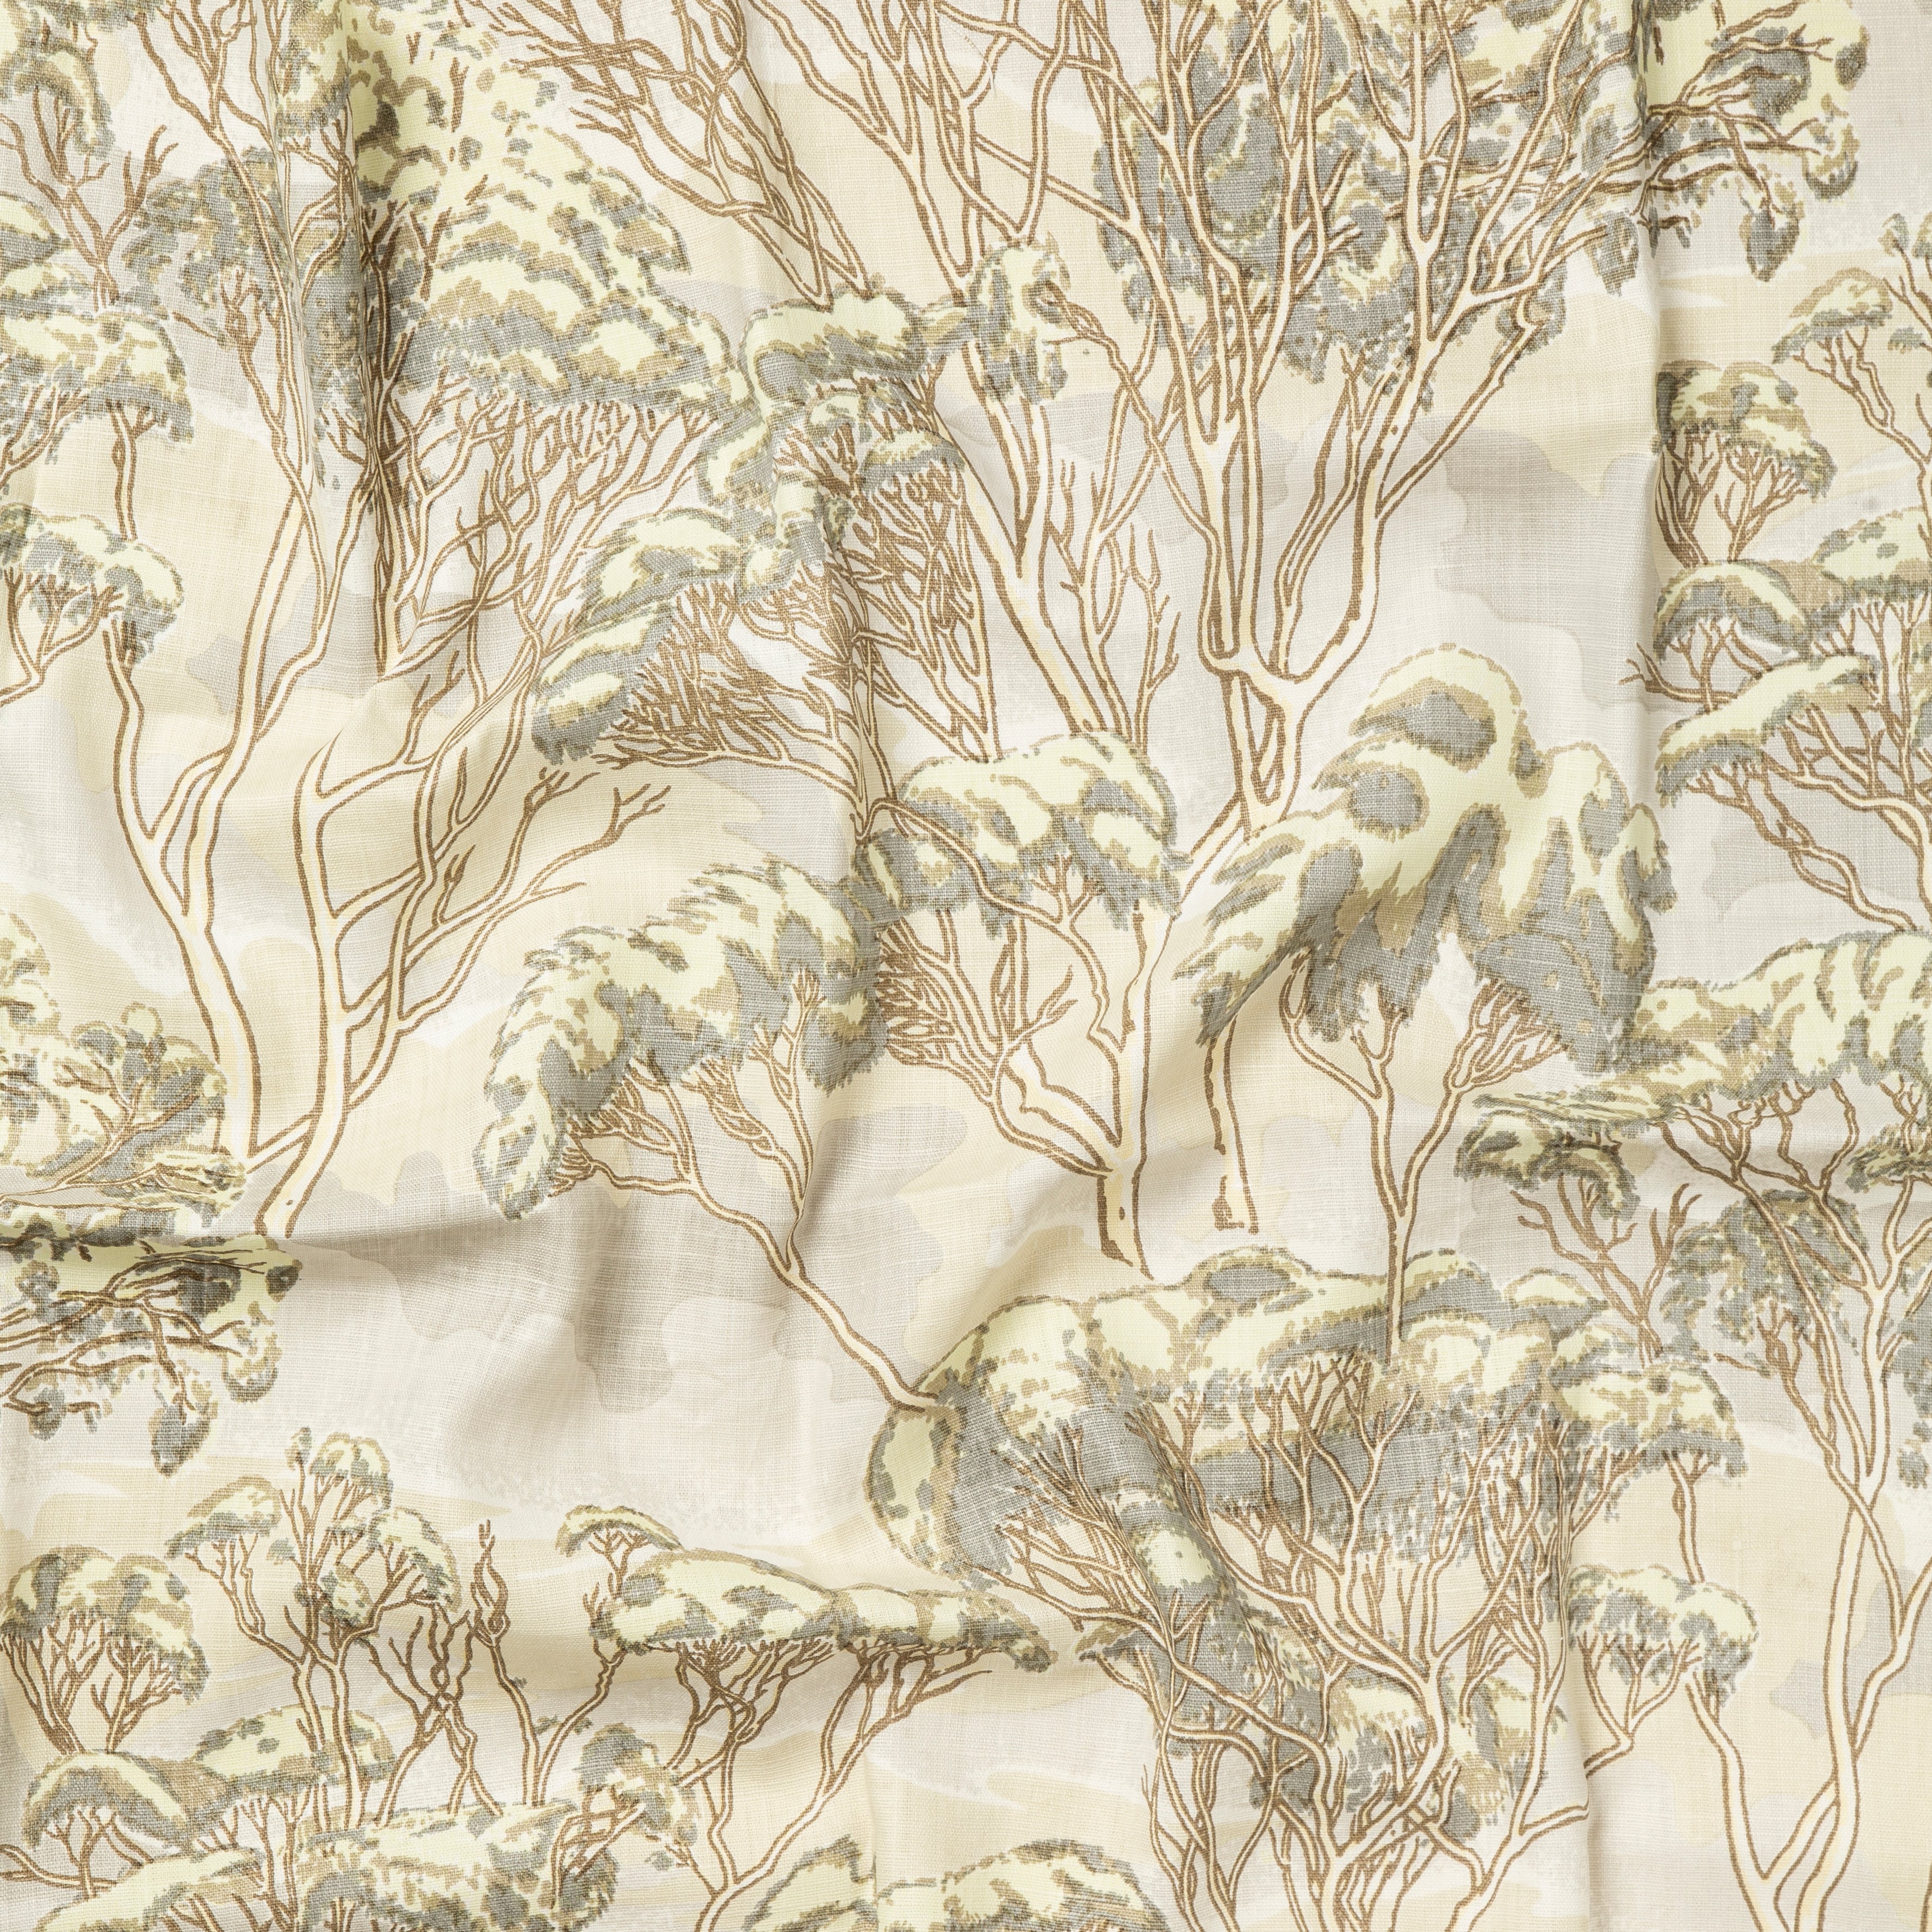 Draped fabric in a painterly tree print in shades of gray and brown on a cream field.